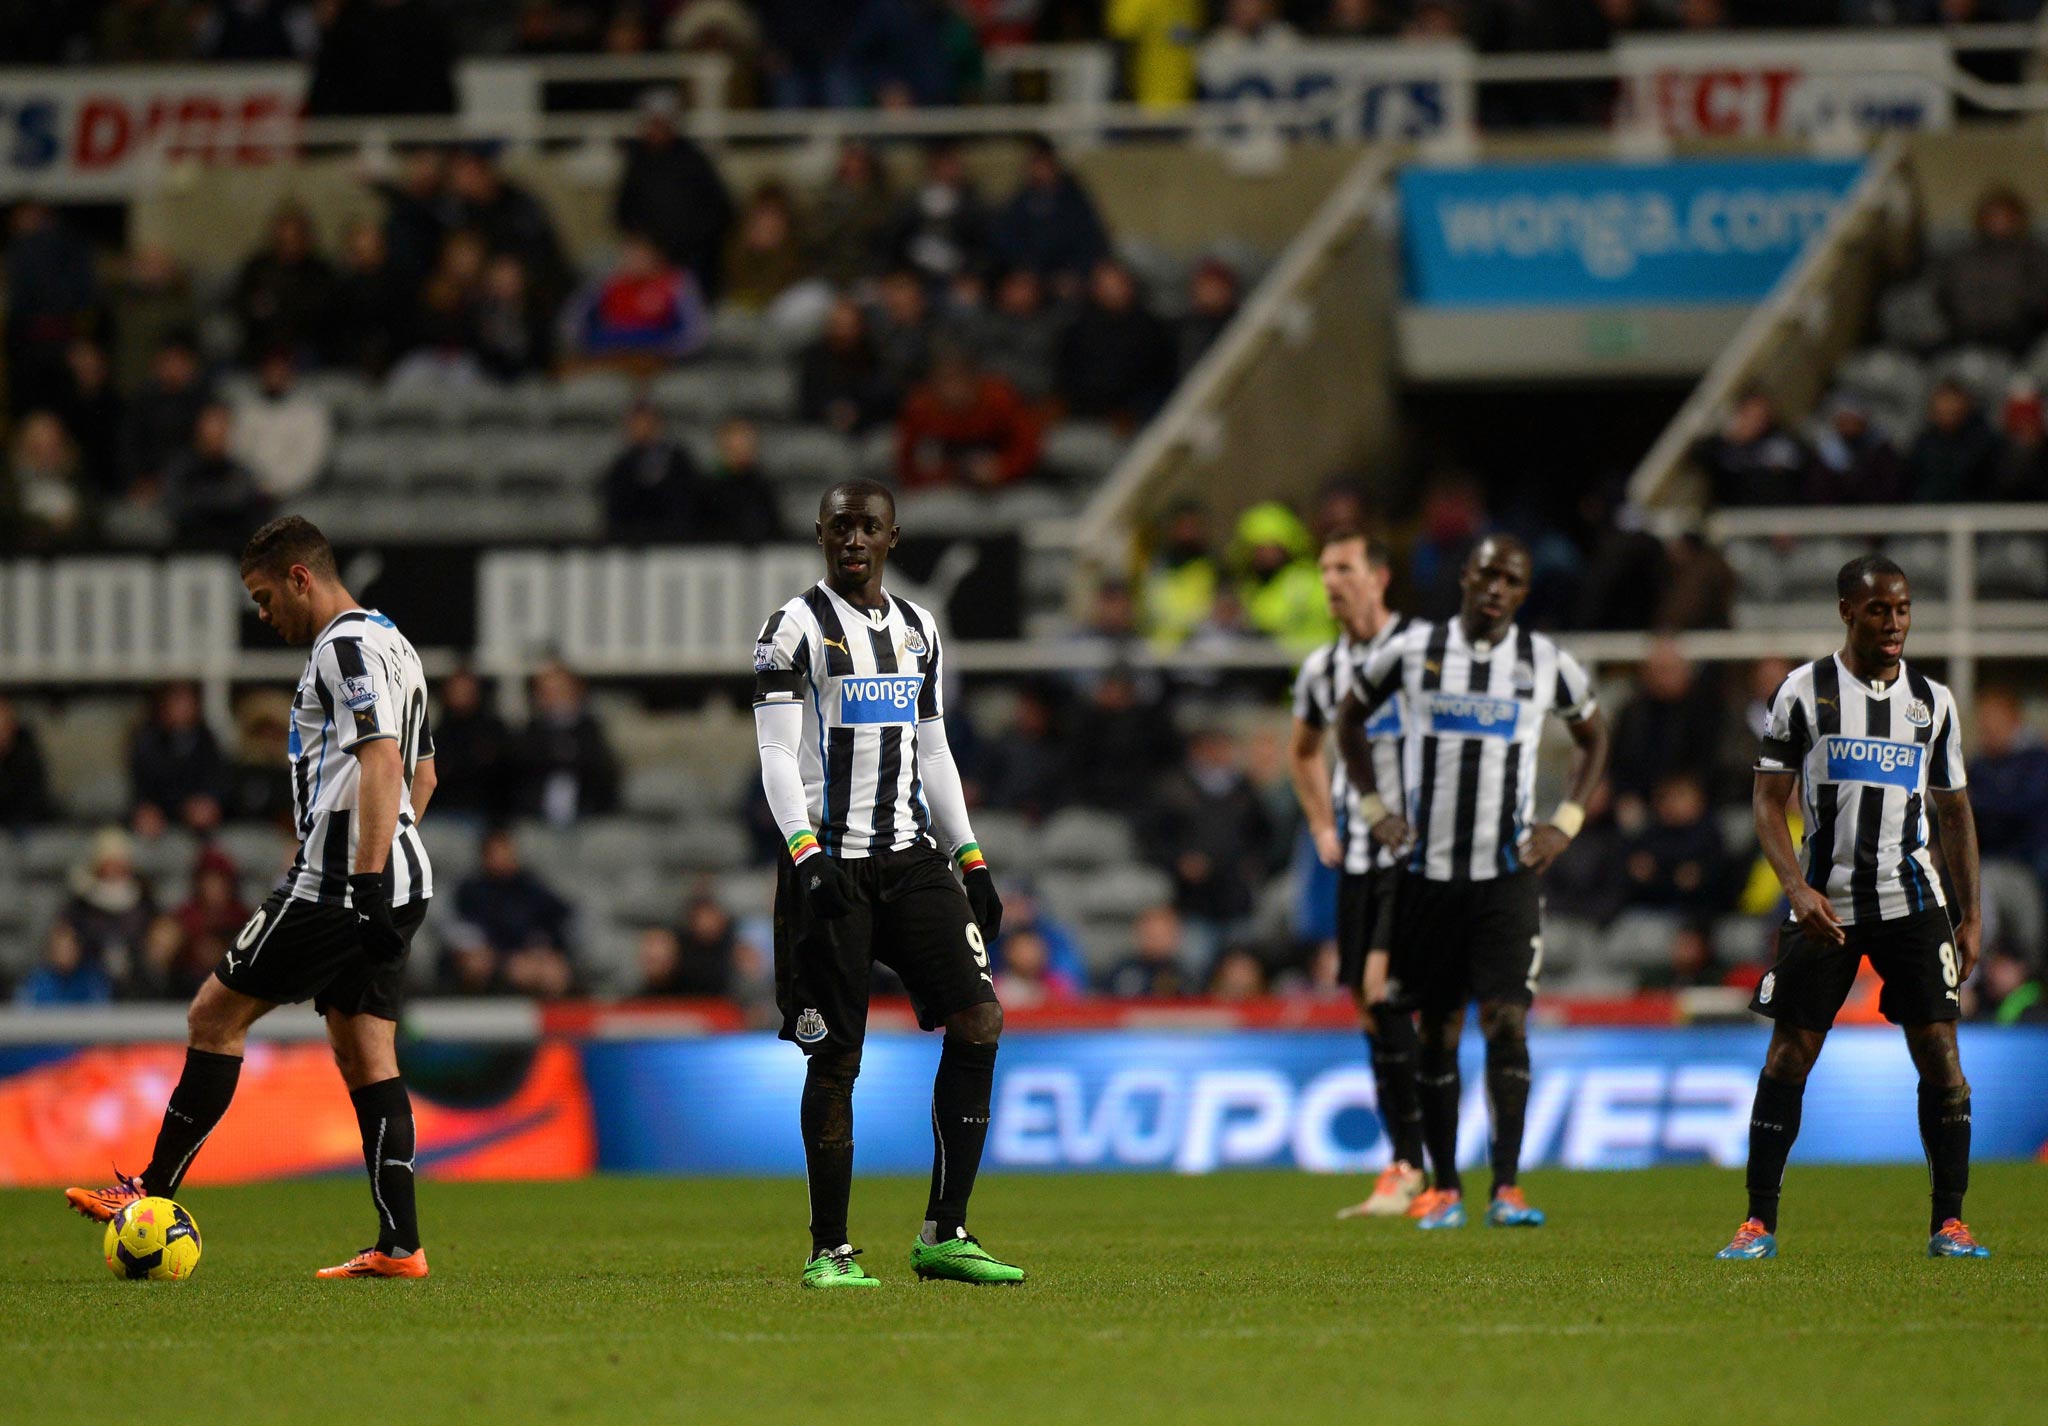 Dejected Newcastle United players after Tottenham’s fourth goal